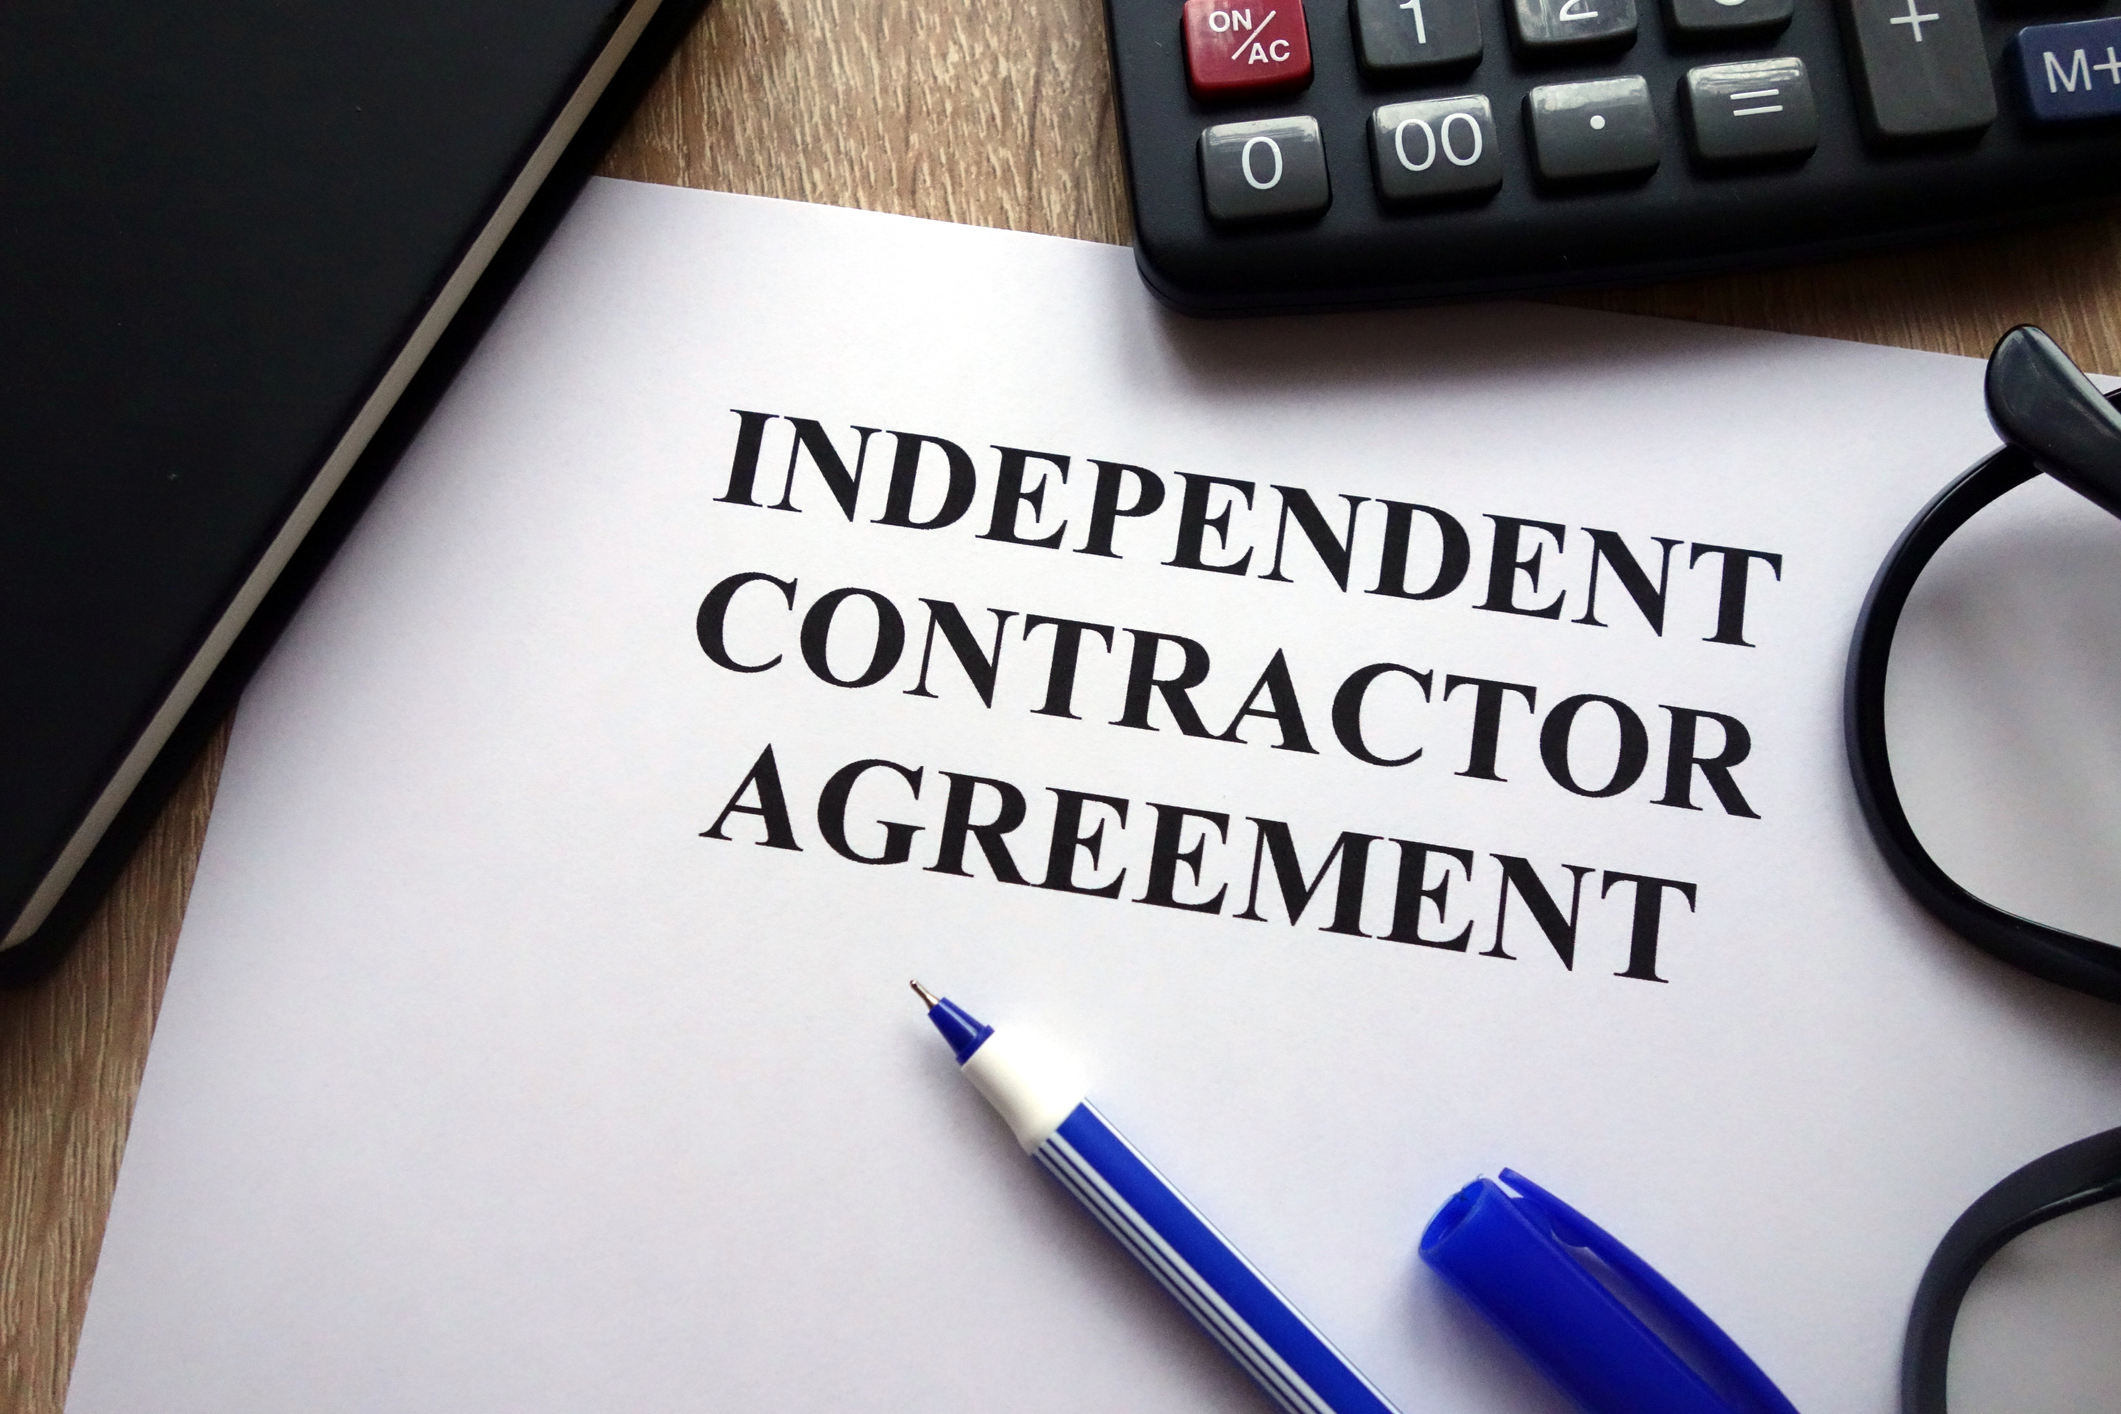 Independent Contractor or Employee?